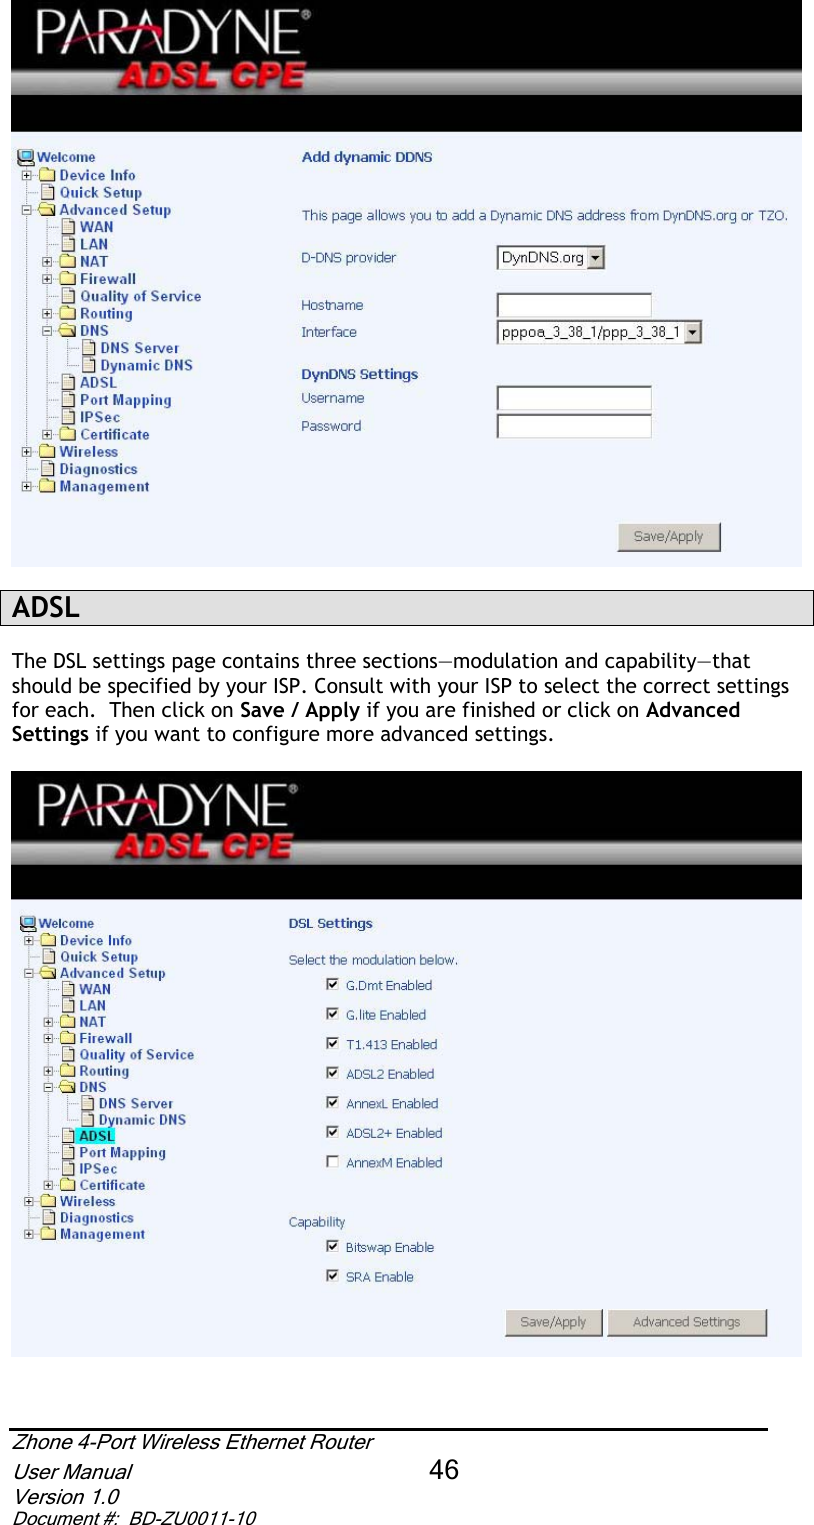 ADSLThe DSL settings page contains three sections—modulation and capability—that should be specified by your ISP. Consult with your ISP to select the correct settings for each.  Then click on Save / Apply if you are finished or click on Advanced Settings if you want to configure more advanced settings. Zhone 4-Port Wireless Ethernet Router User Manual 46Version 1.0 Document #:  BD-ZU0011-10